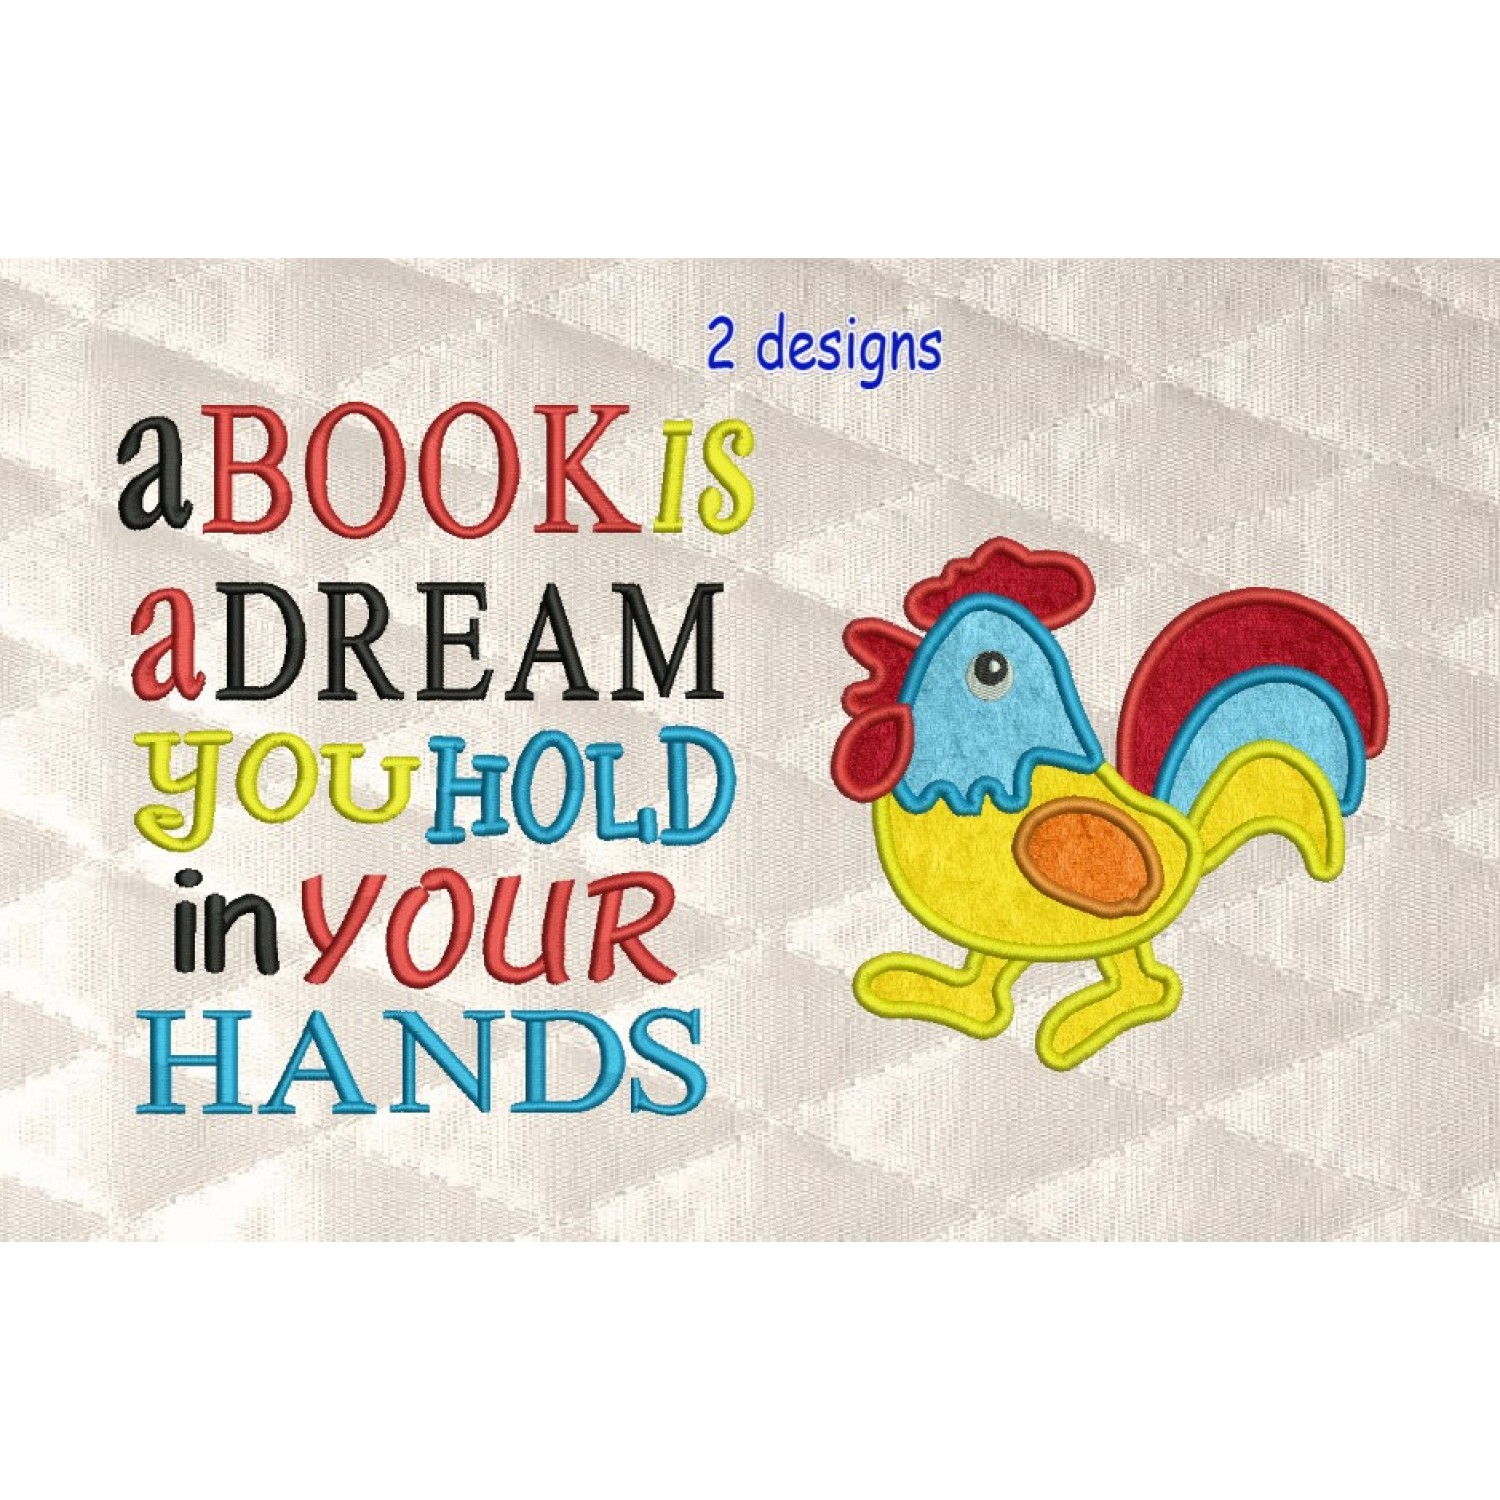 Cock applique with a book is a dream